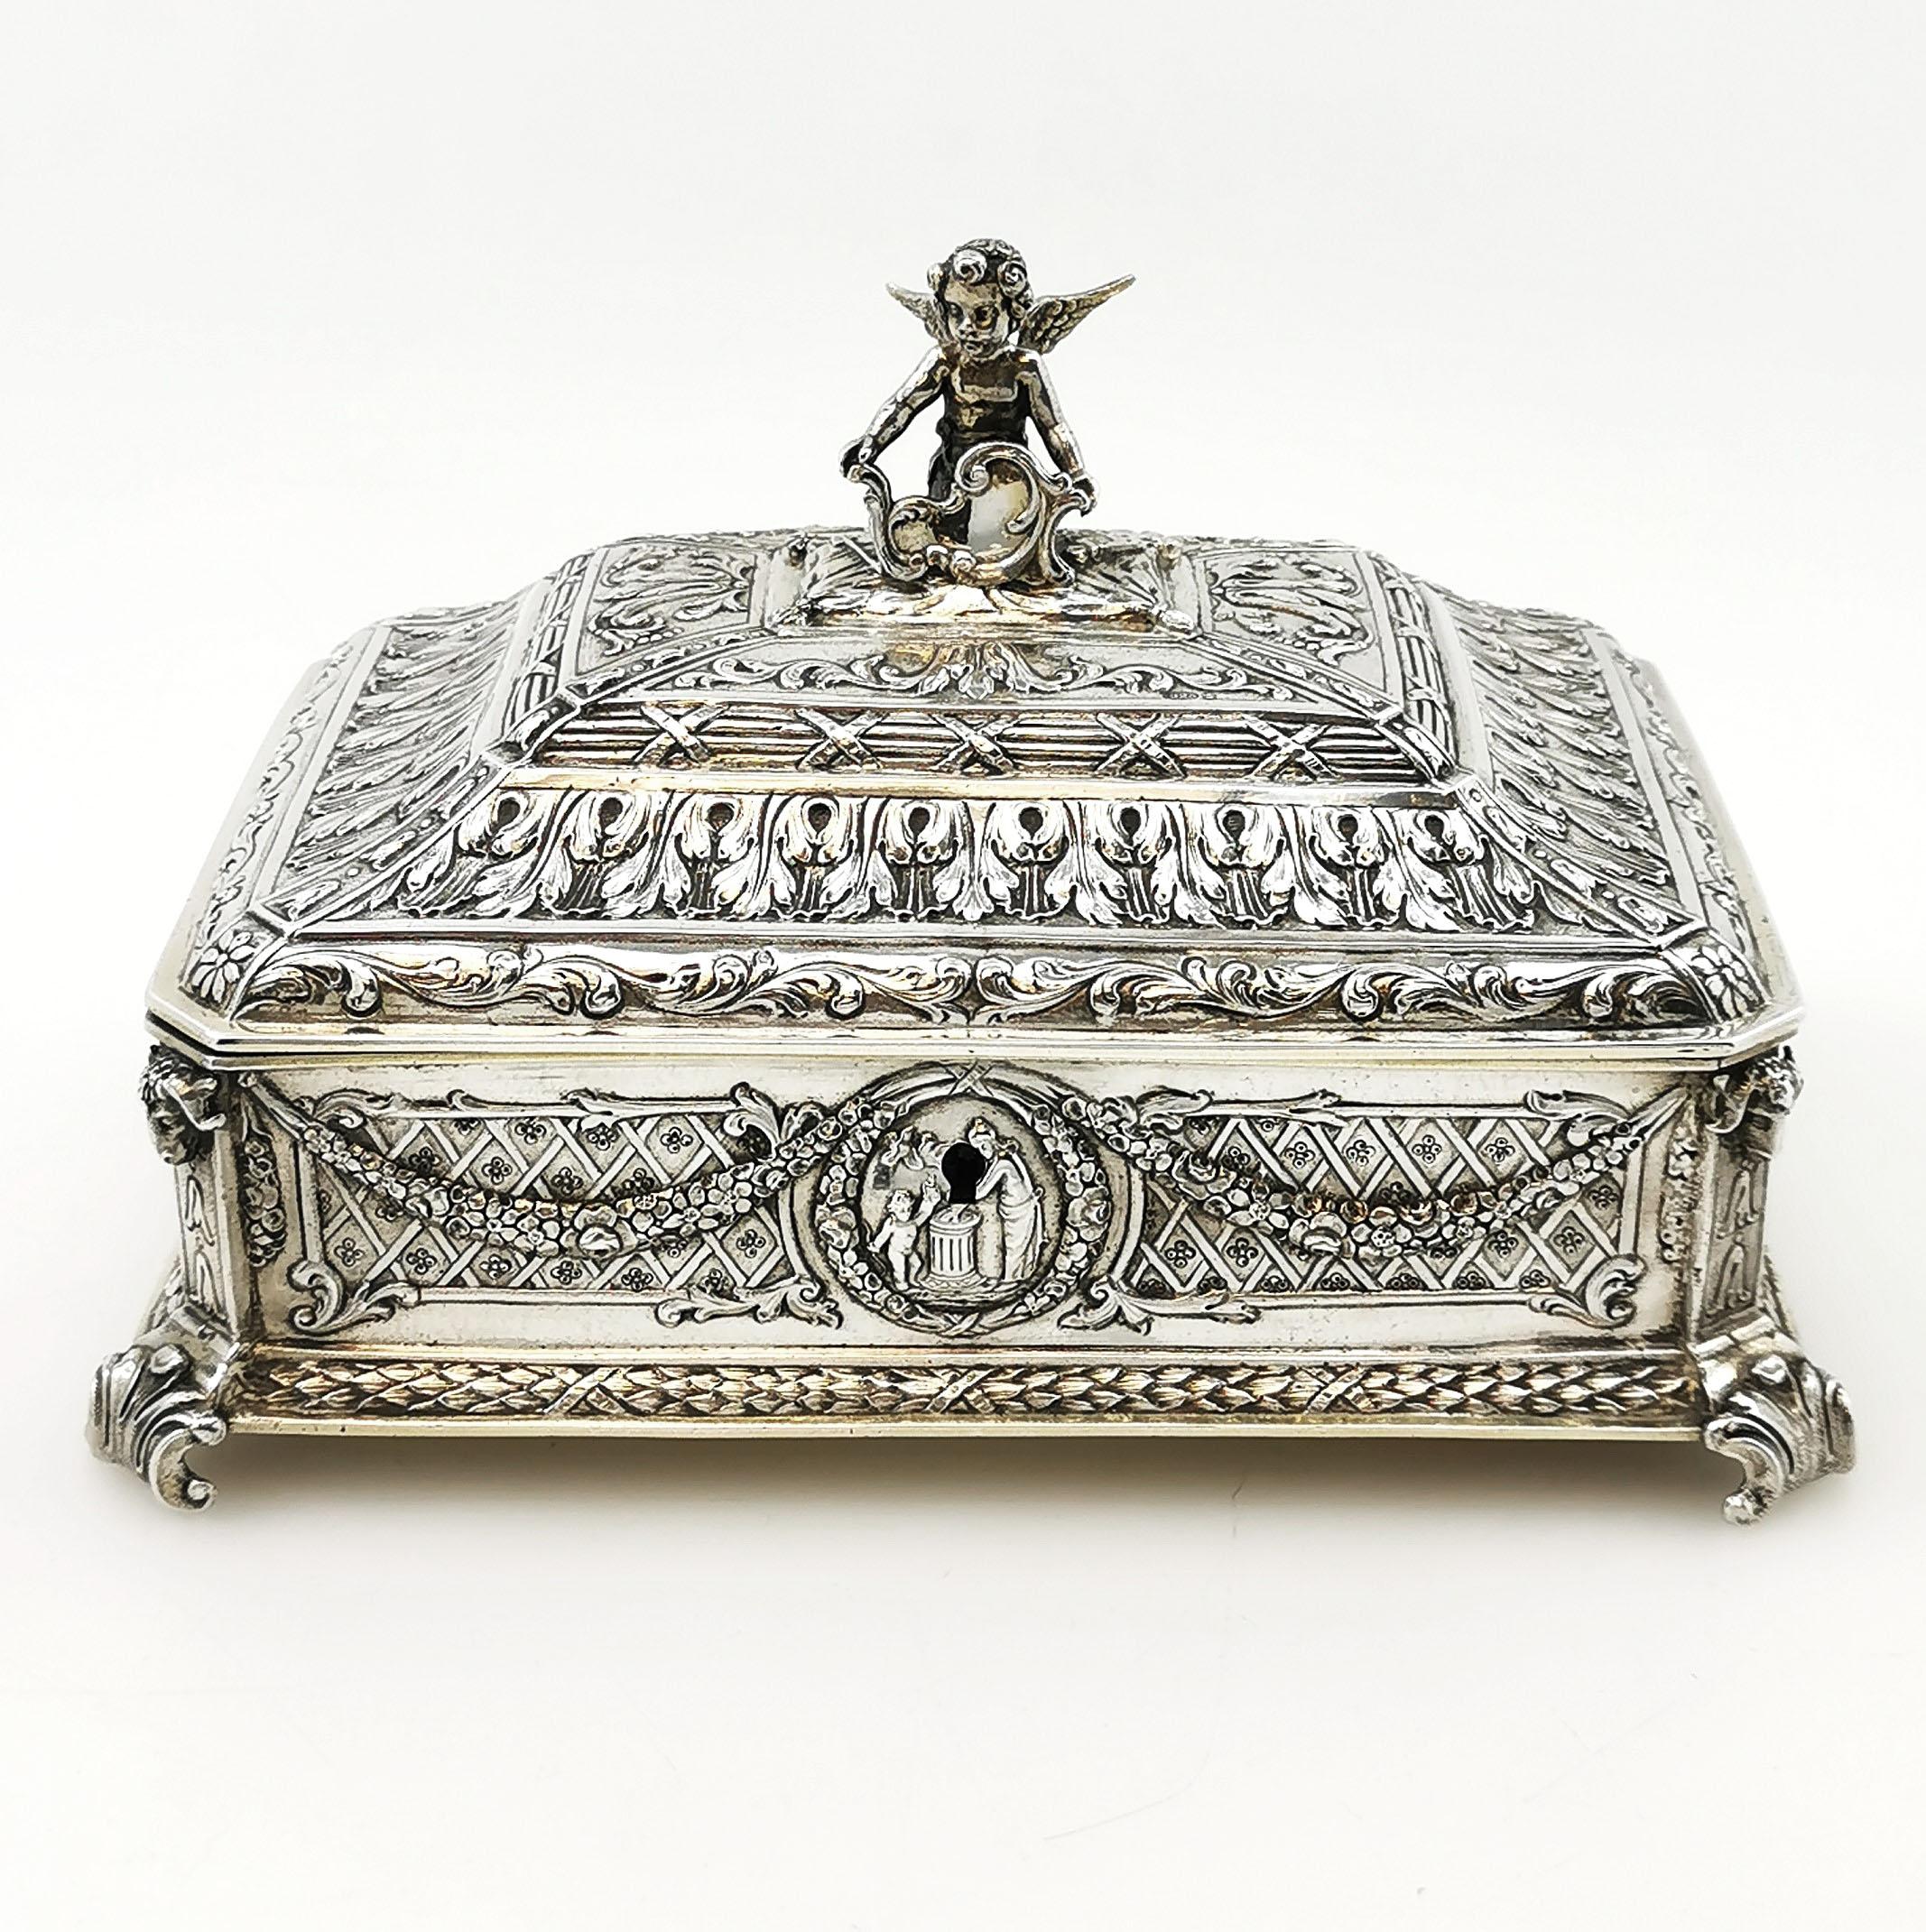 A lovely Antique sterling Silver Box suitable as a Jewellery Box or a trinket box. This lovely Box has an ornate chased design on its sides and stepped lid with a little cherub on the top as a finial. The Box stands on four stylised leaf feet and is